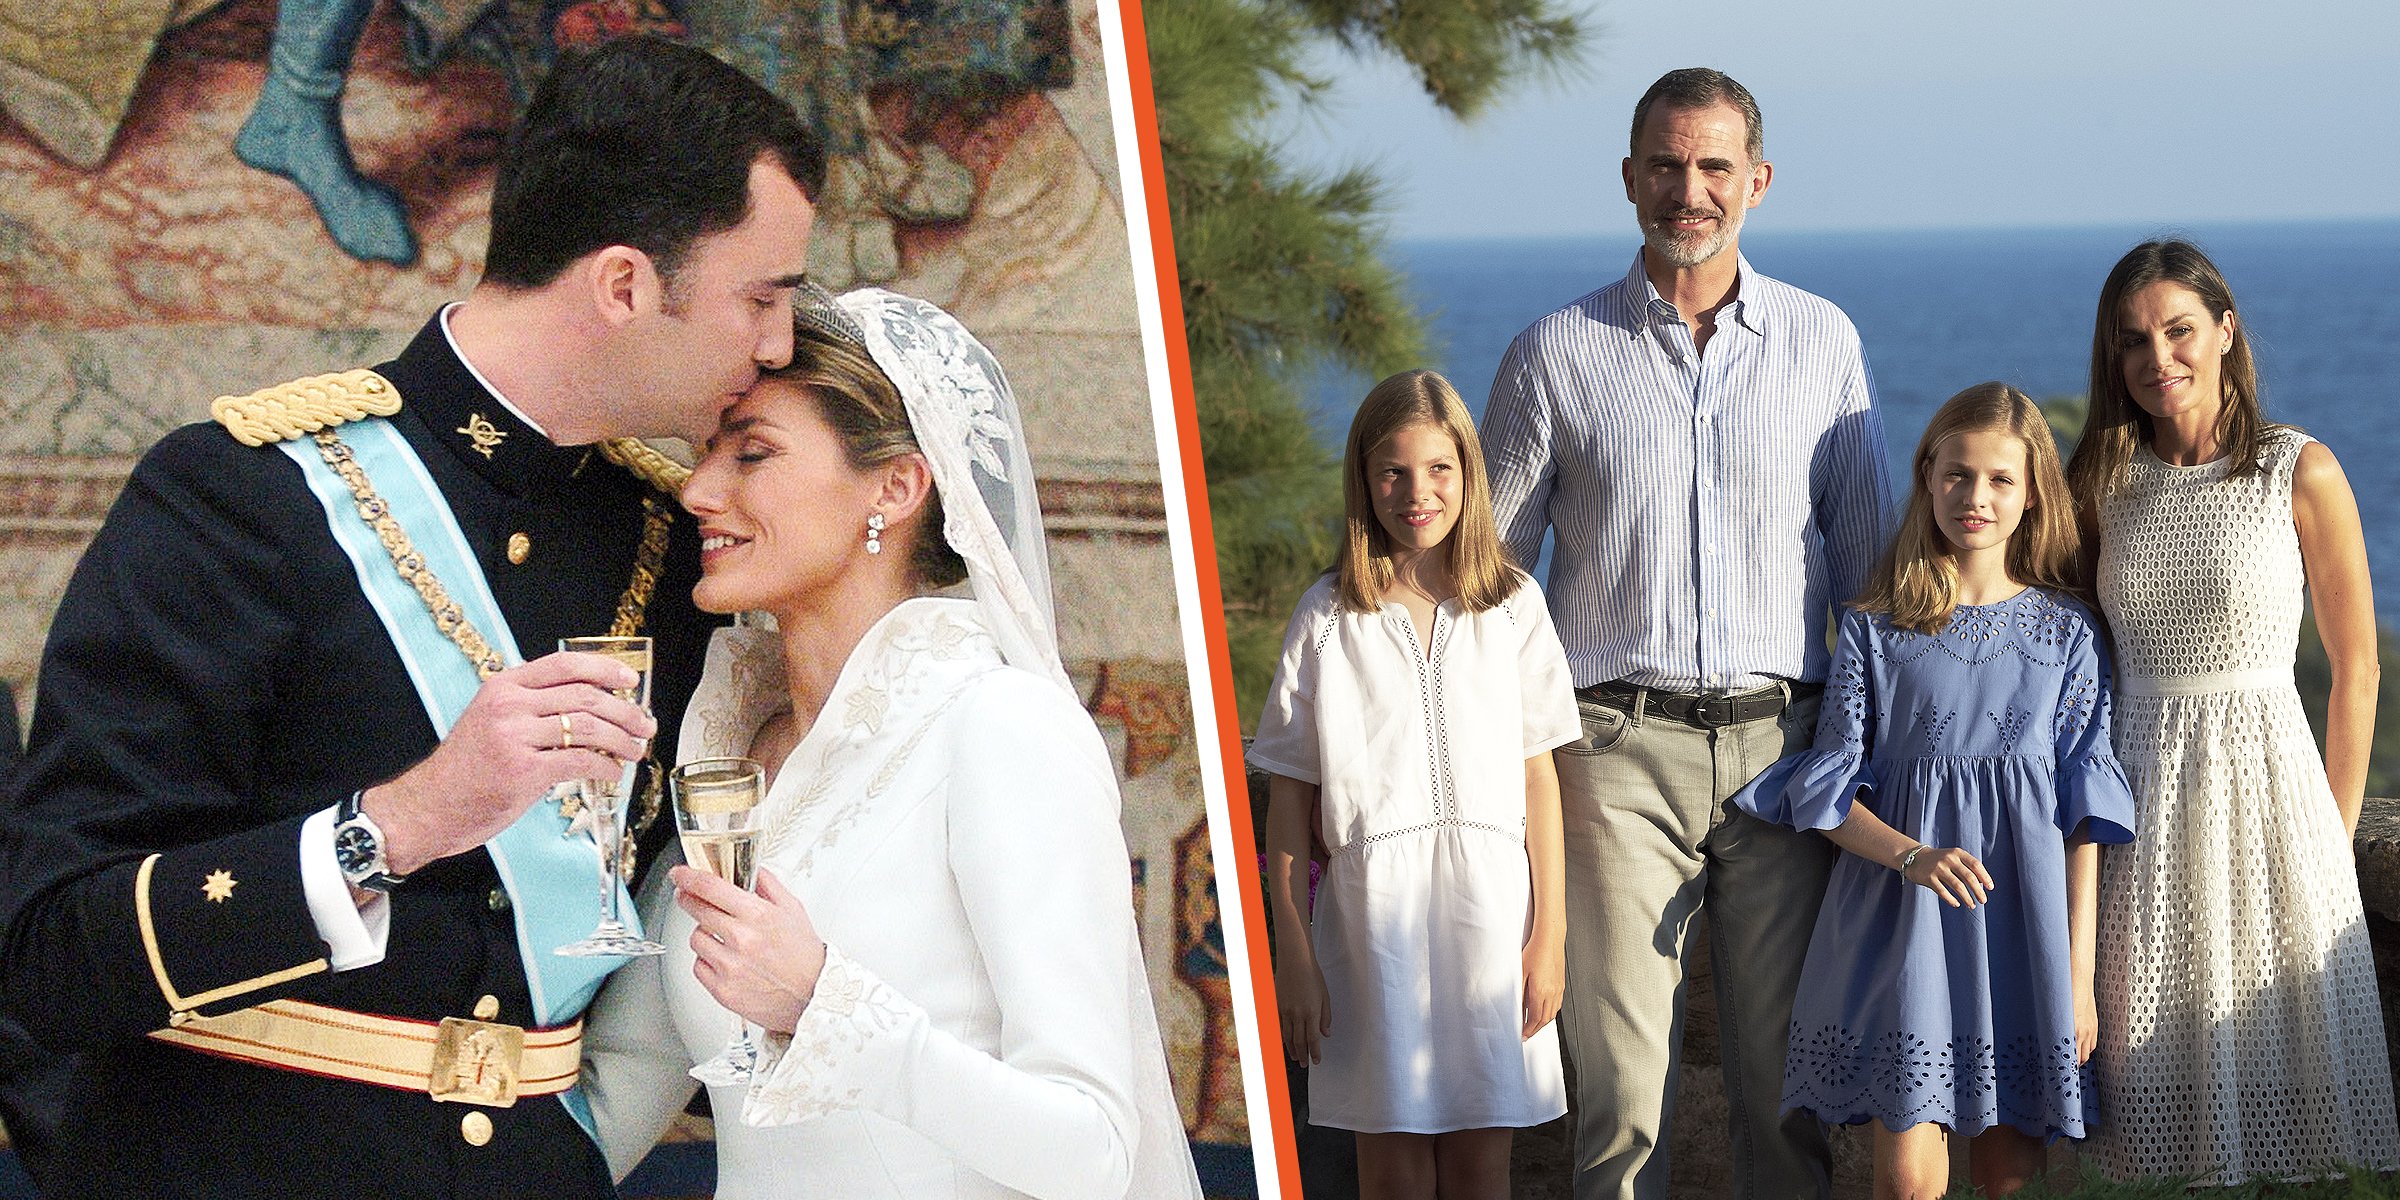 King Felipe VI and Queen Letizia of Spain | King Felipe and Queen Letizia with their daughters | Source: Getty Images